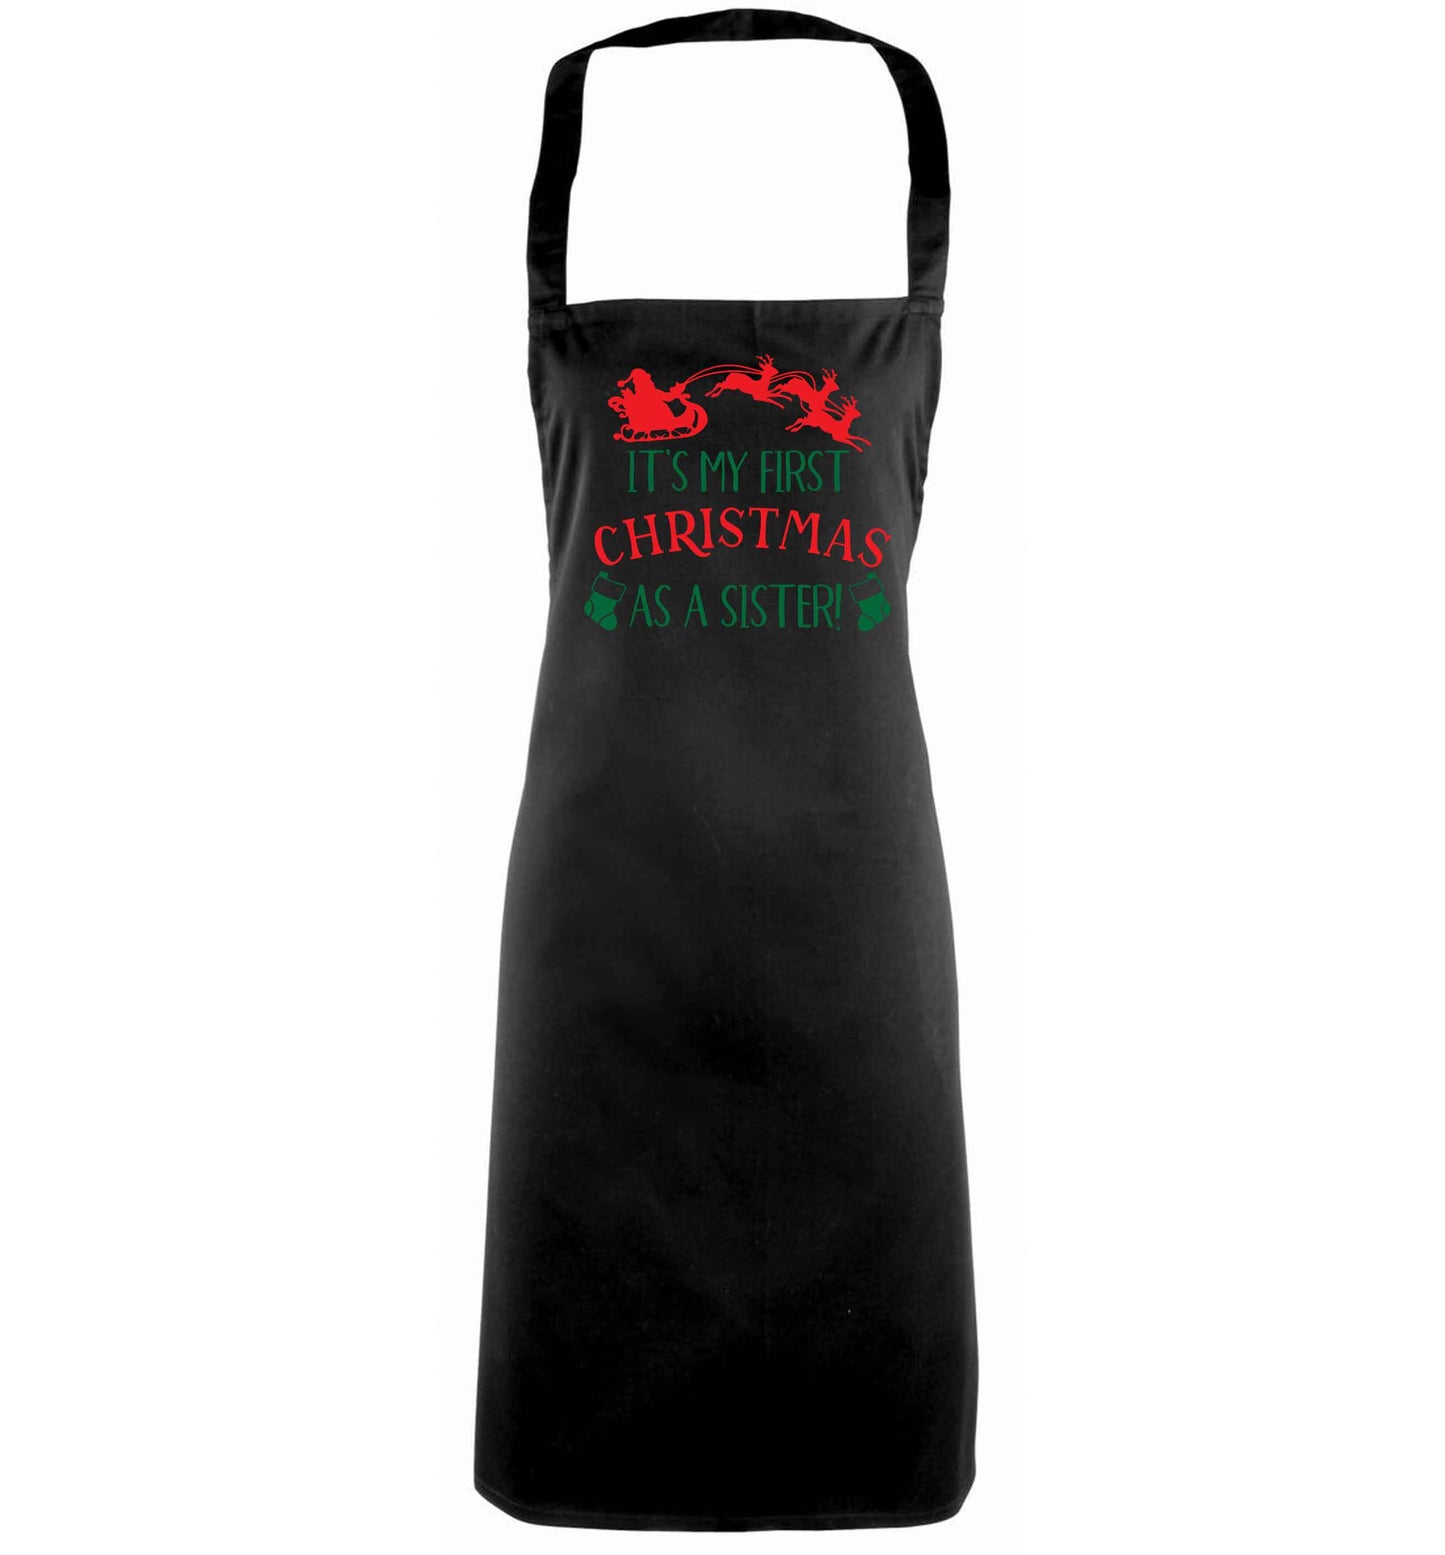 It's my first Christmas as a sister! black apron